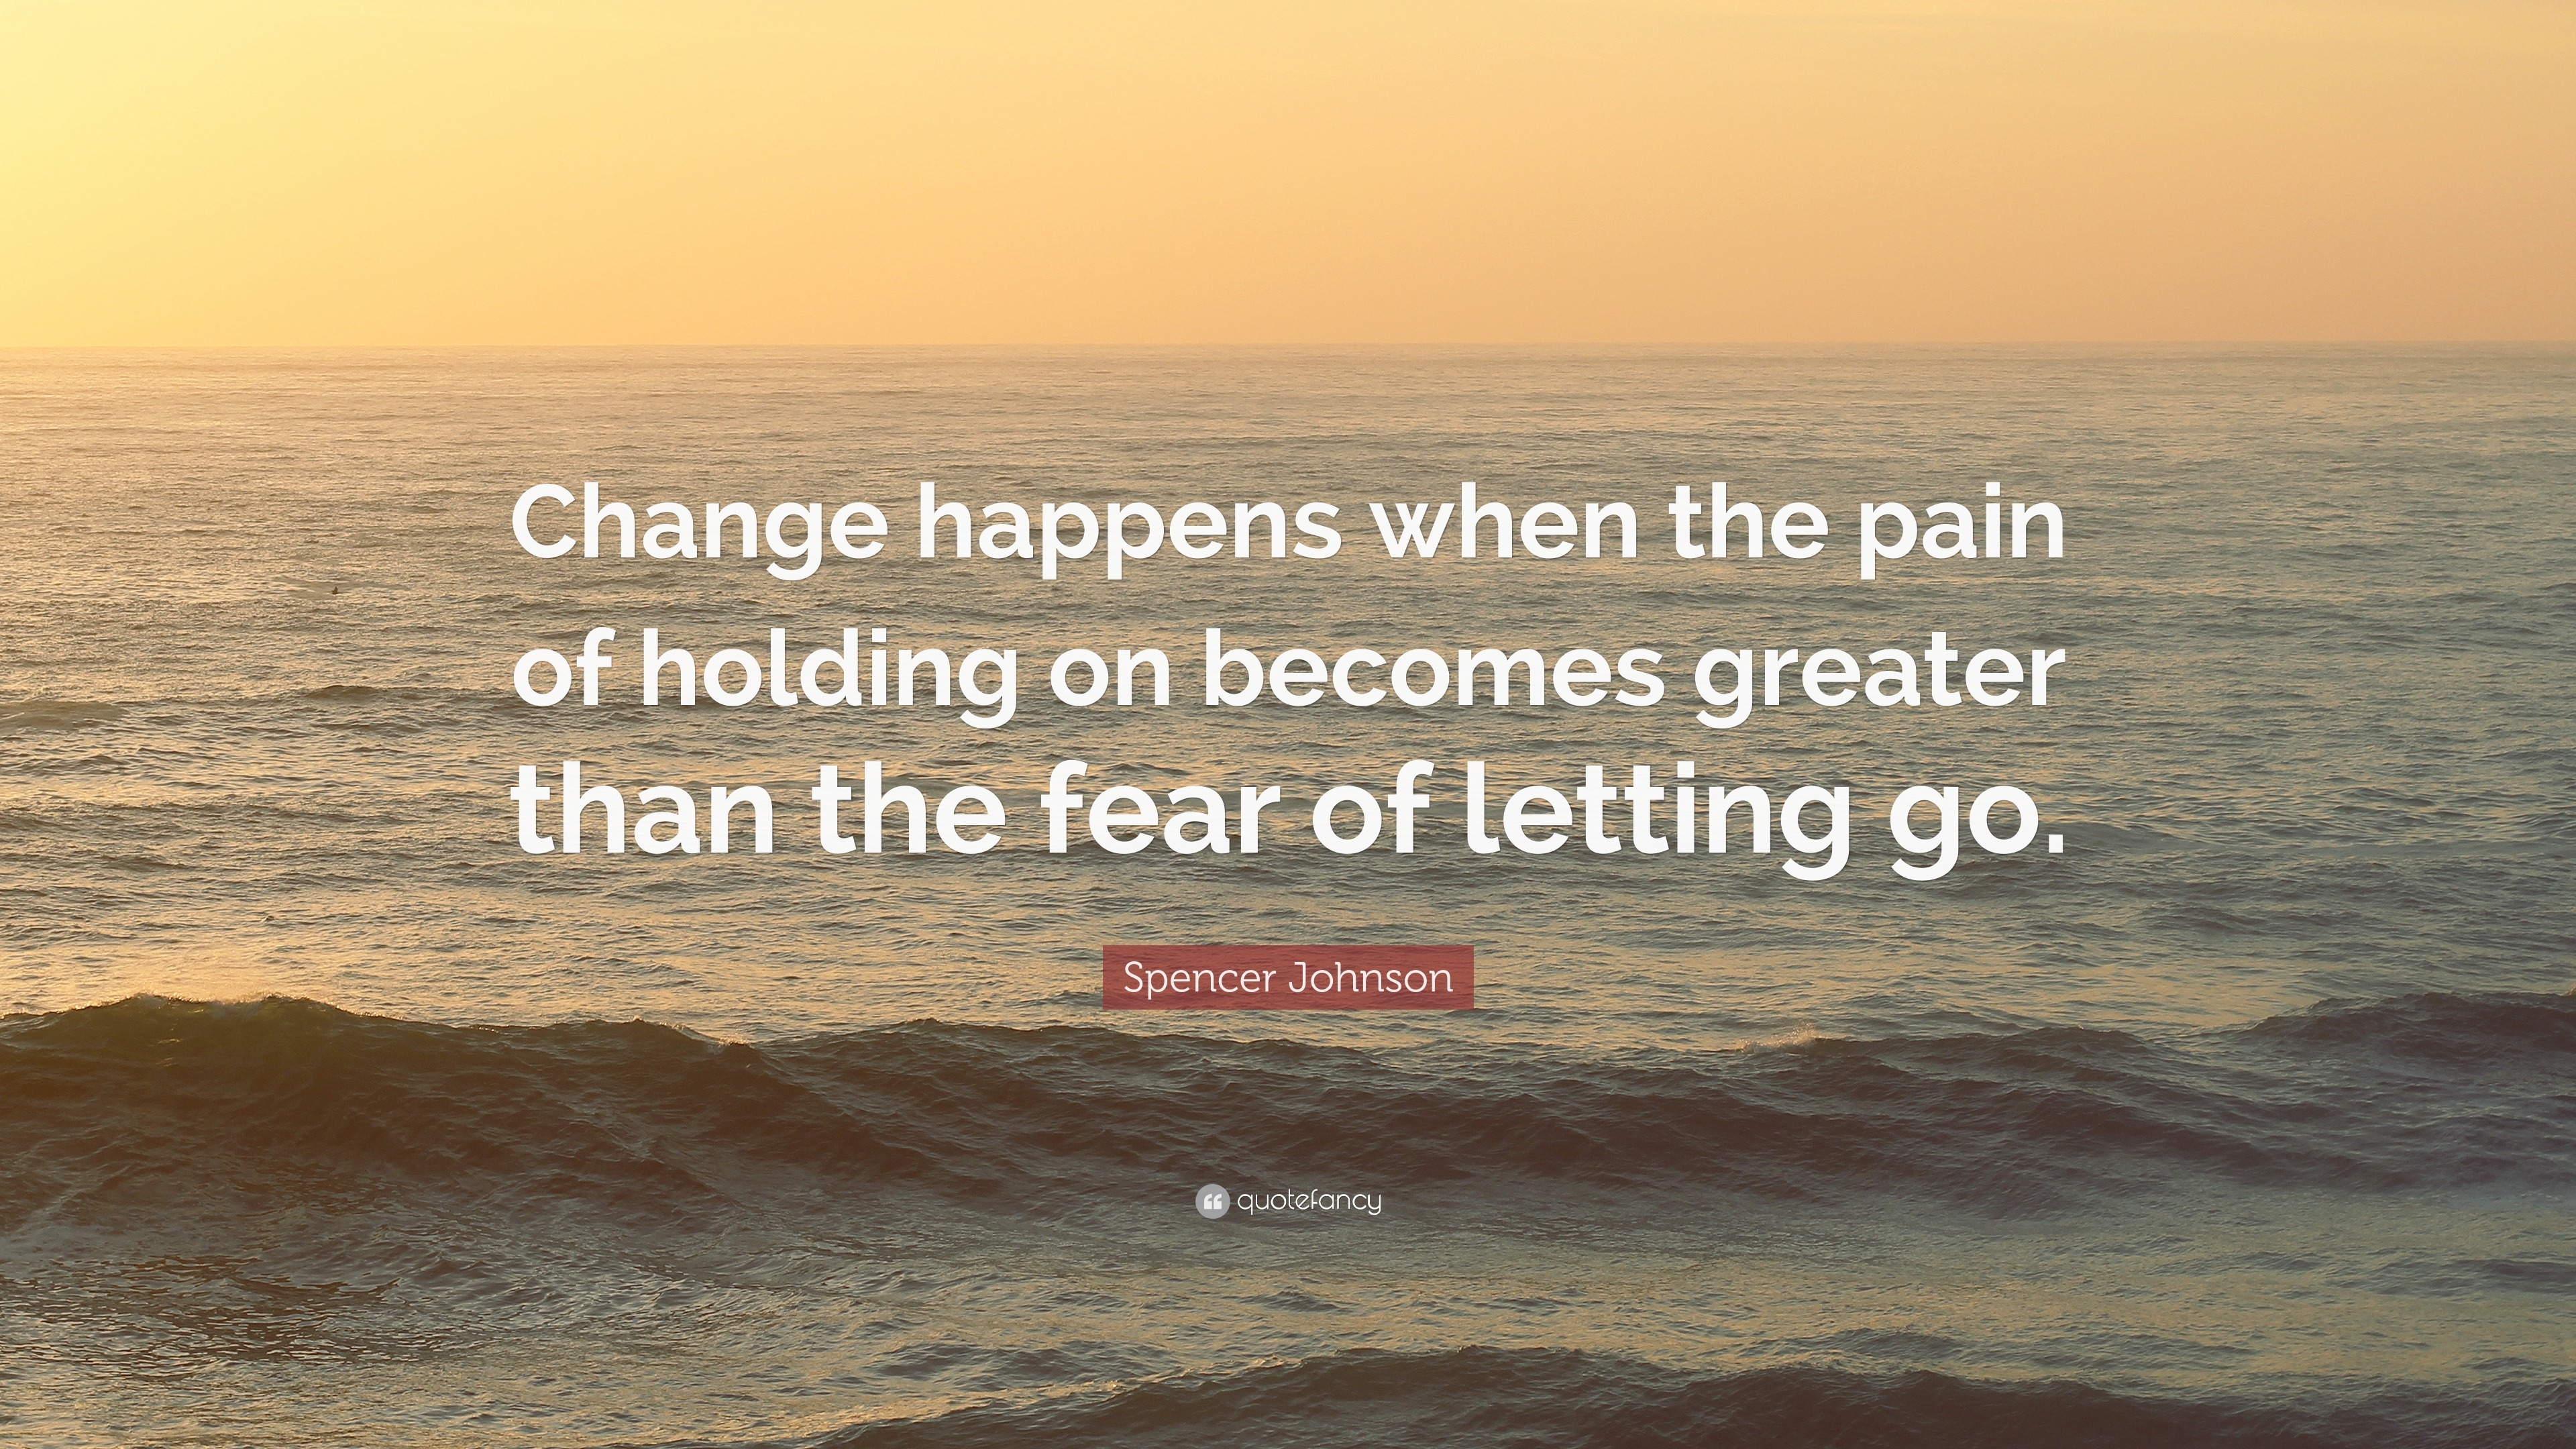 Spencer Johnson Quote: “Change happens when the pain of holding on ...